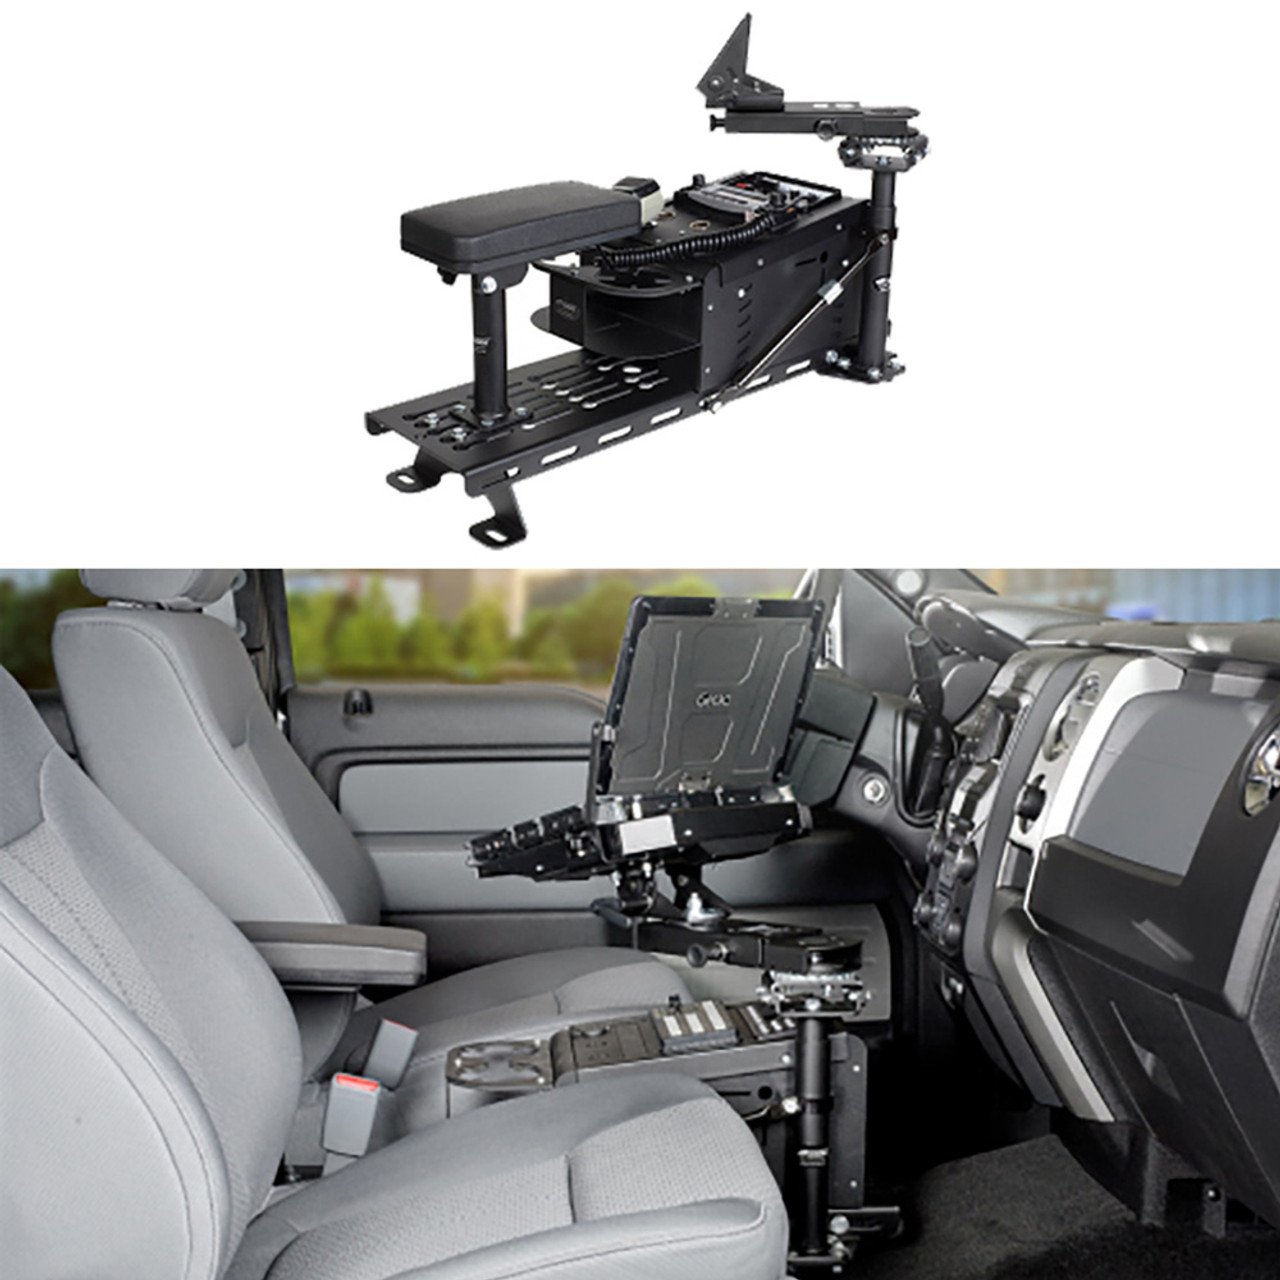 Laptop, Tablet, Keyboard Mount Kit for Ford F150 MCS Floorplate Mounted by Gamber Johnson